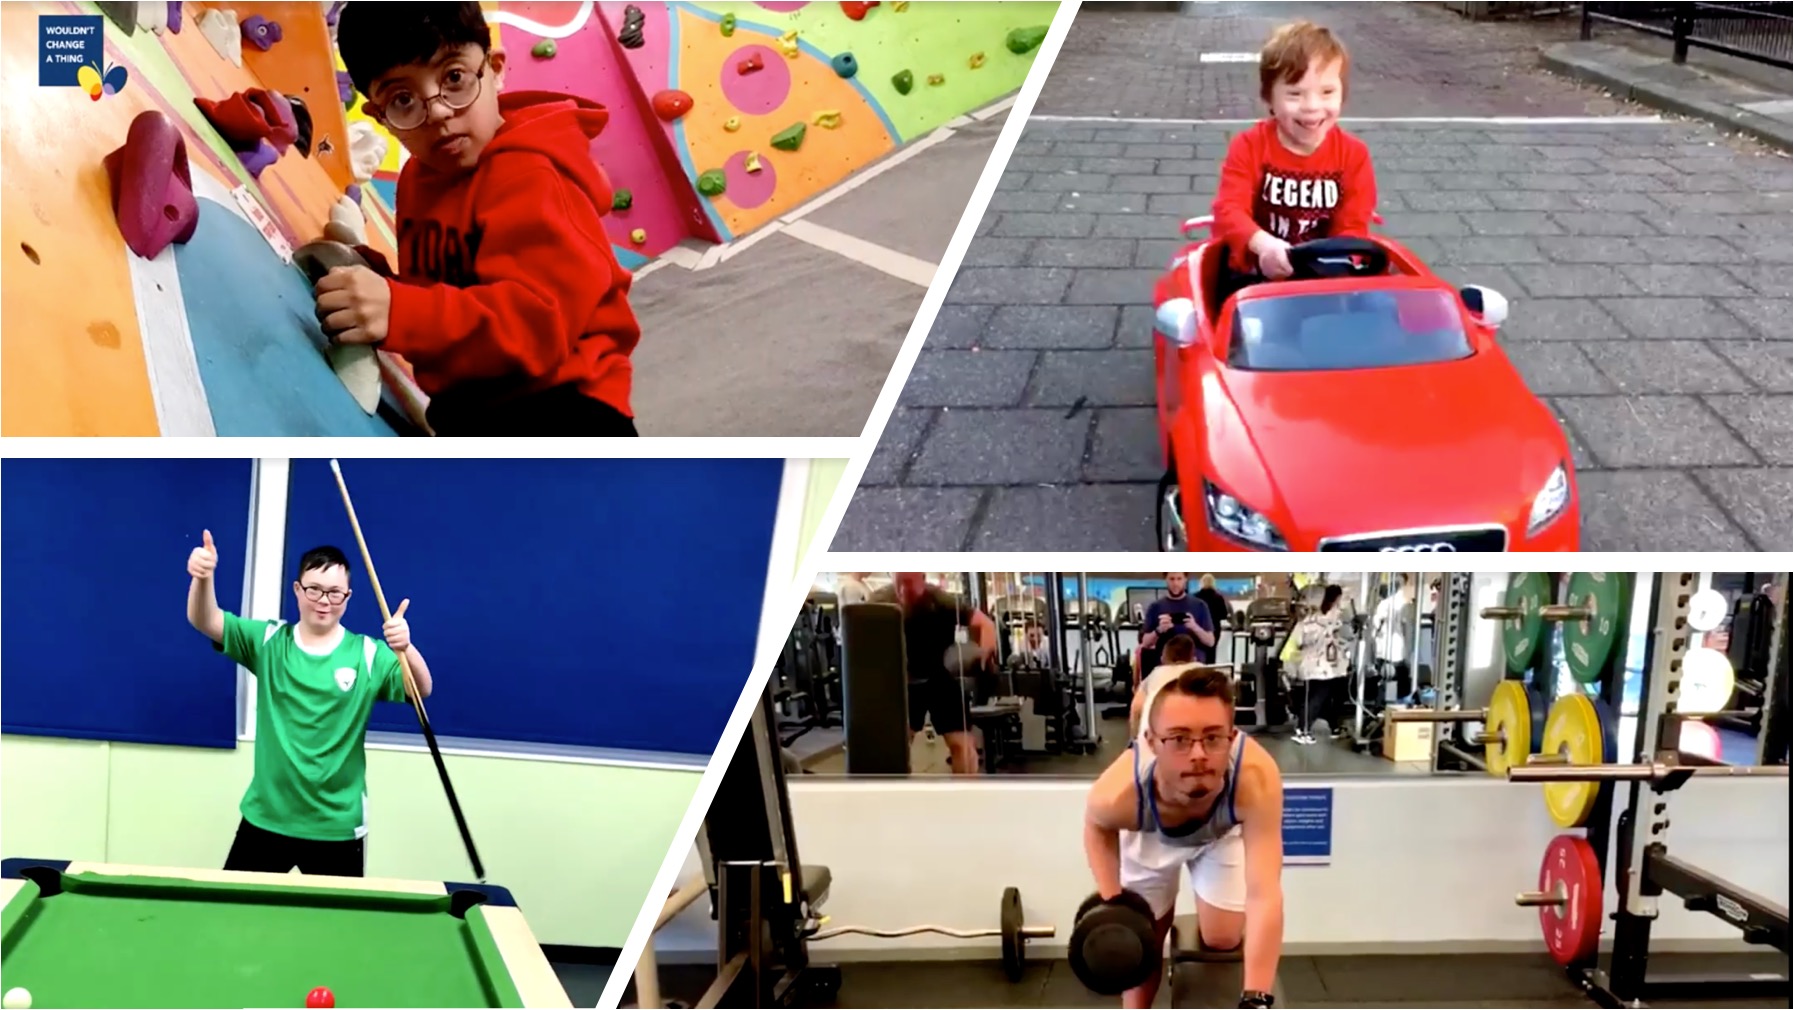 Music Video Shows People With Down Syndrome Living Their Best Lives [WATCH]